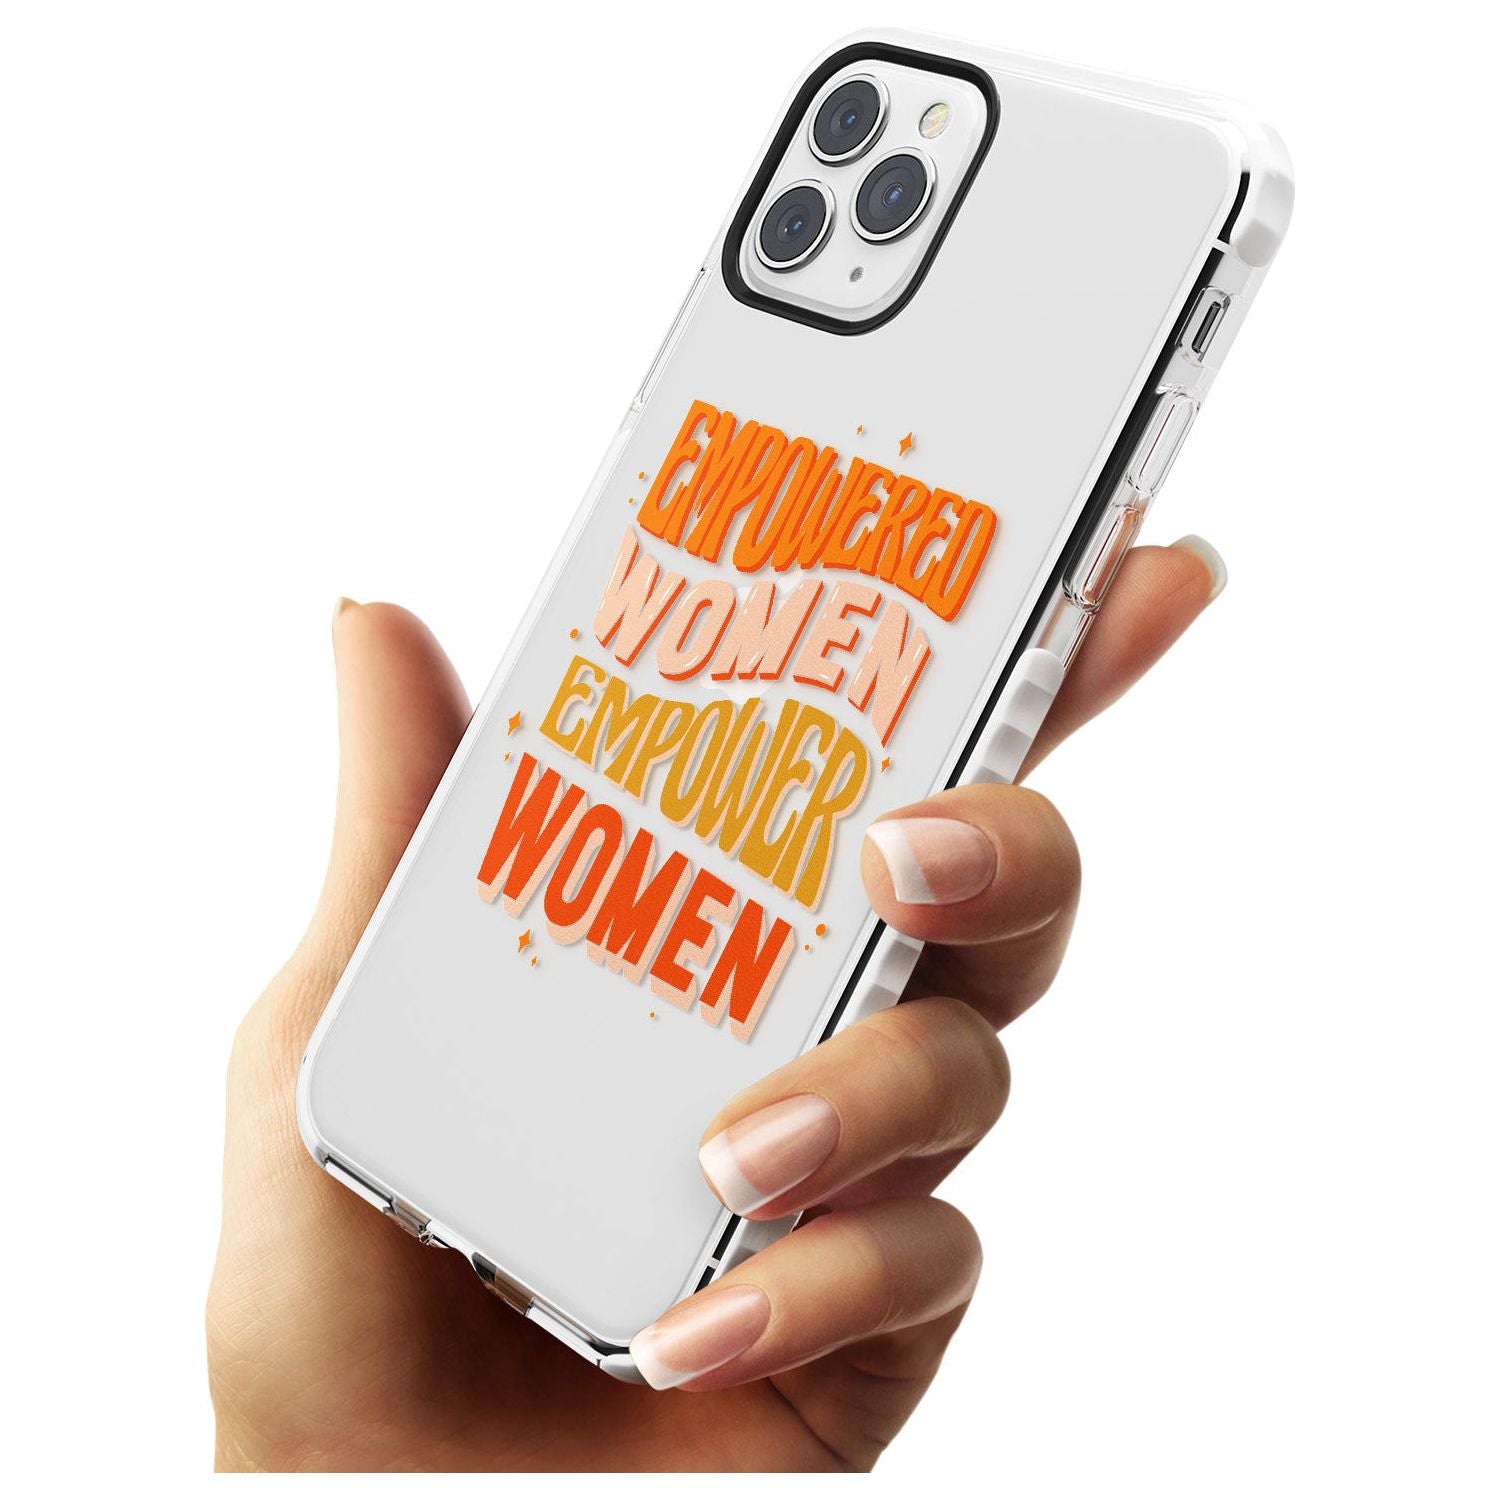 Empowered Women Impact Phone Case for iPhone 11 Pro Max